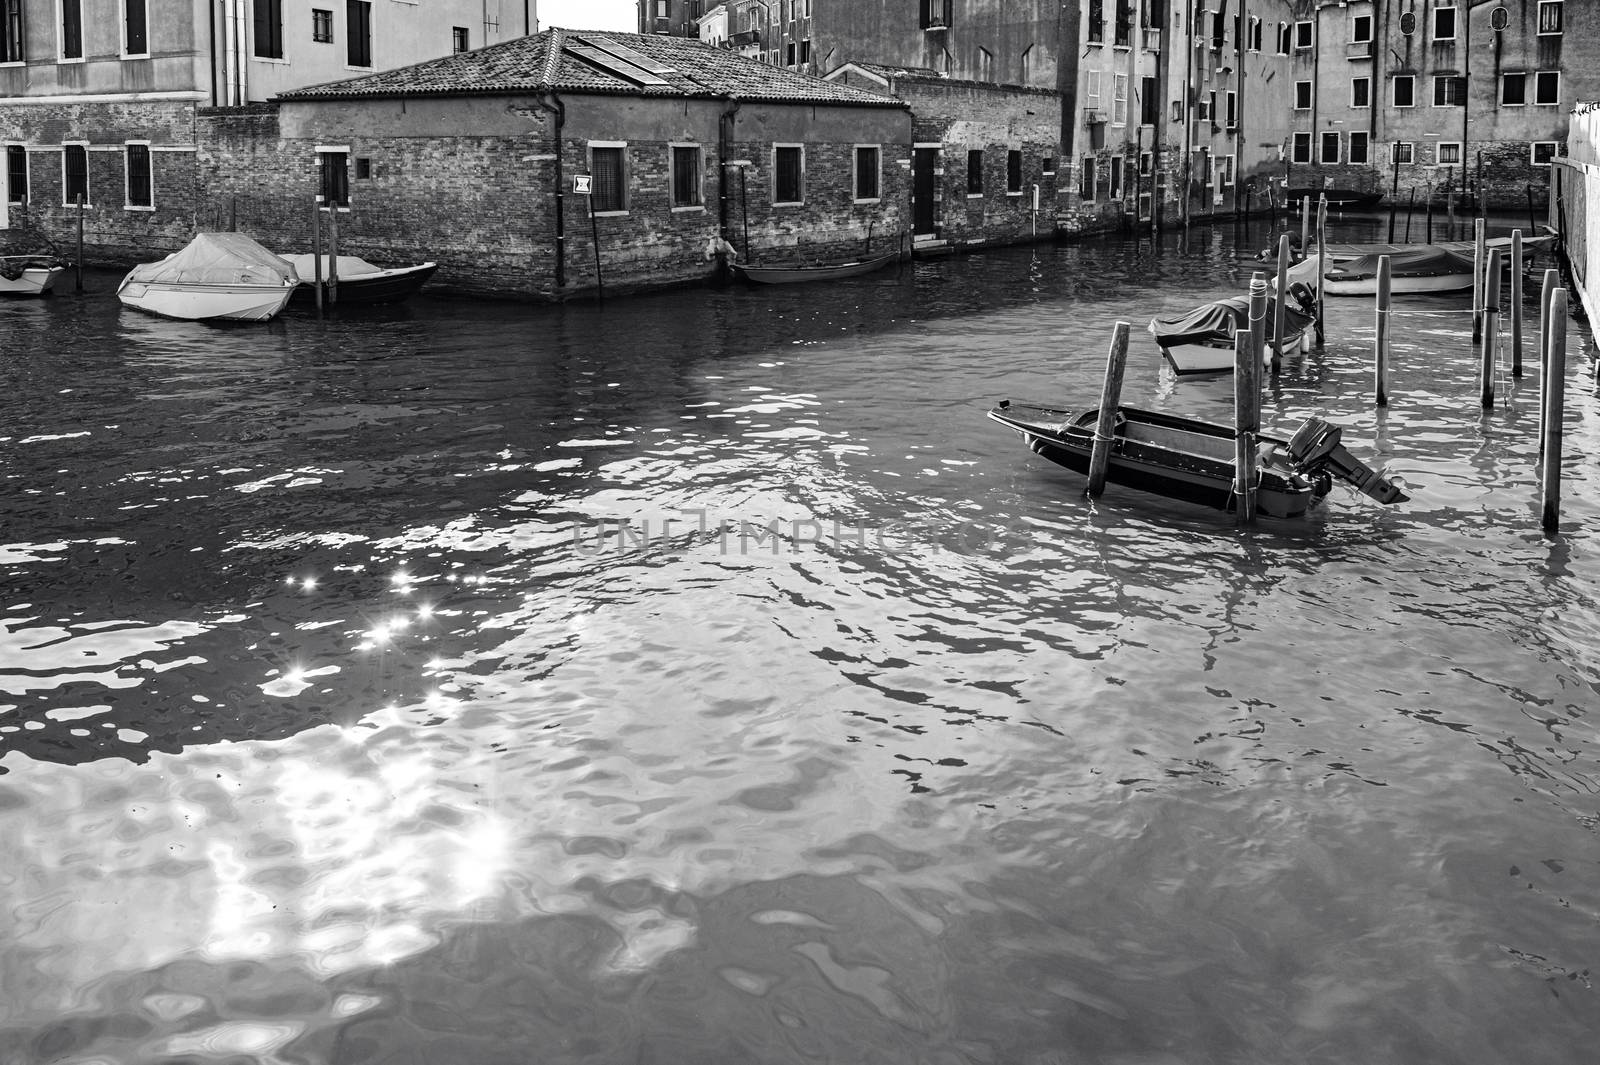 Venice in black and white. by gkuna